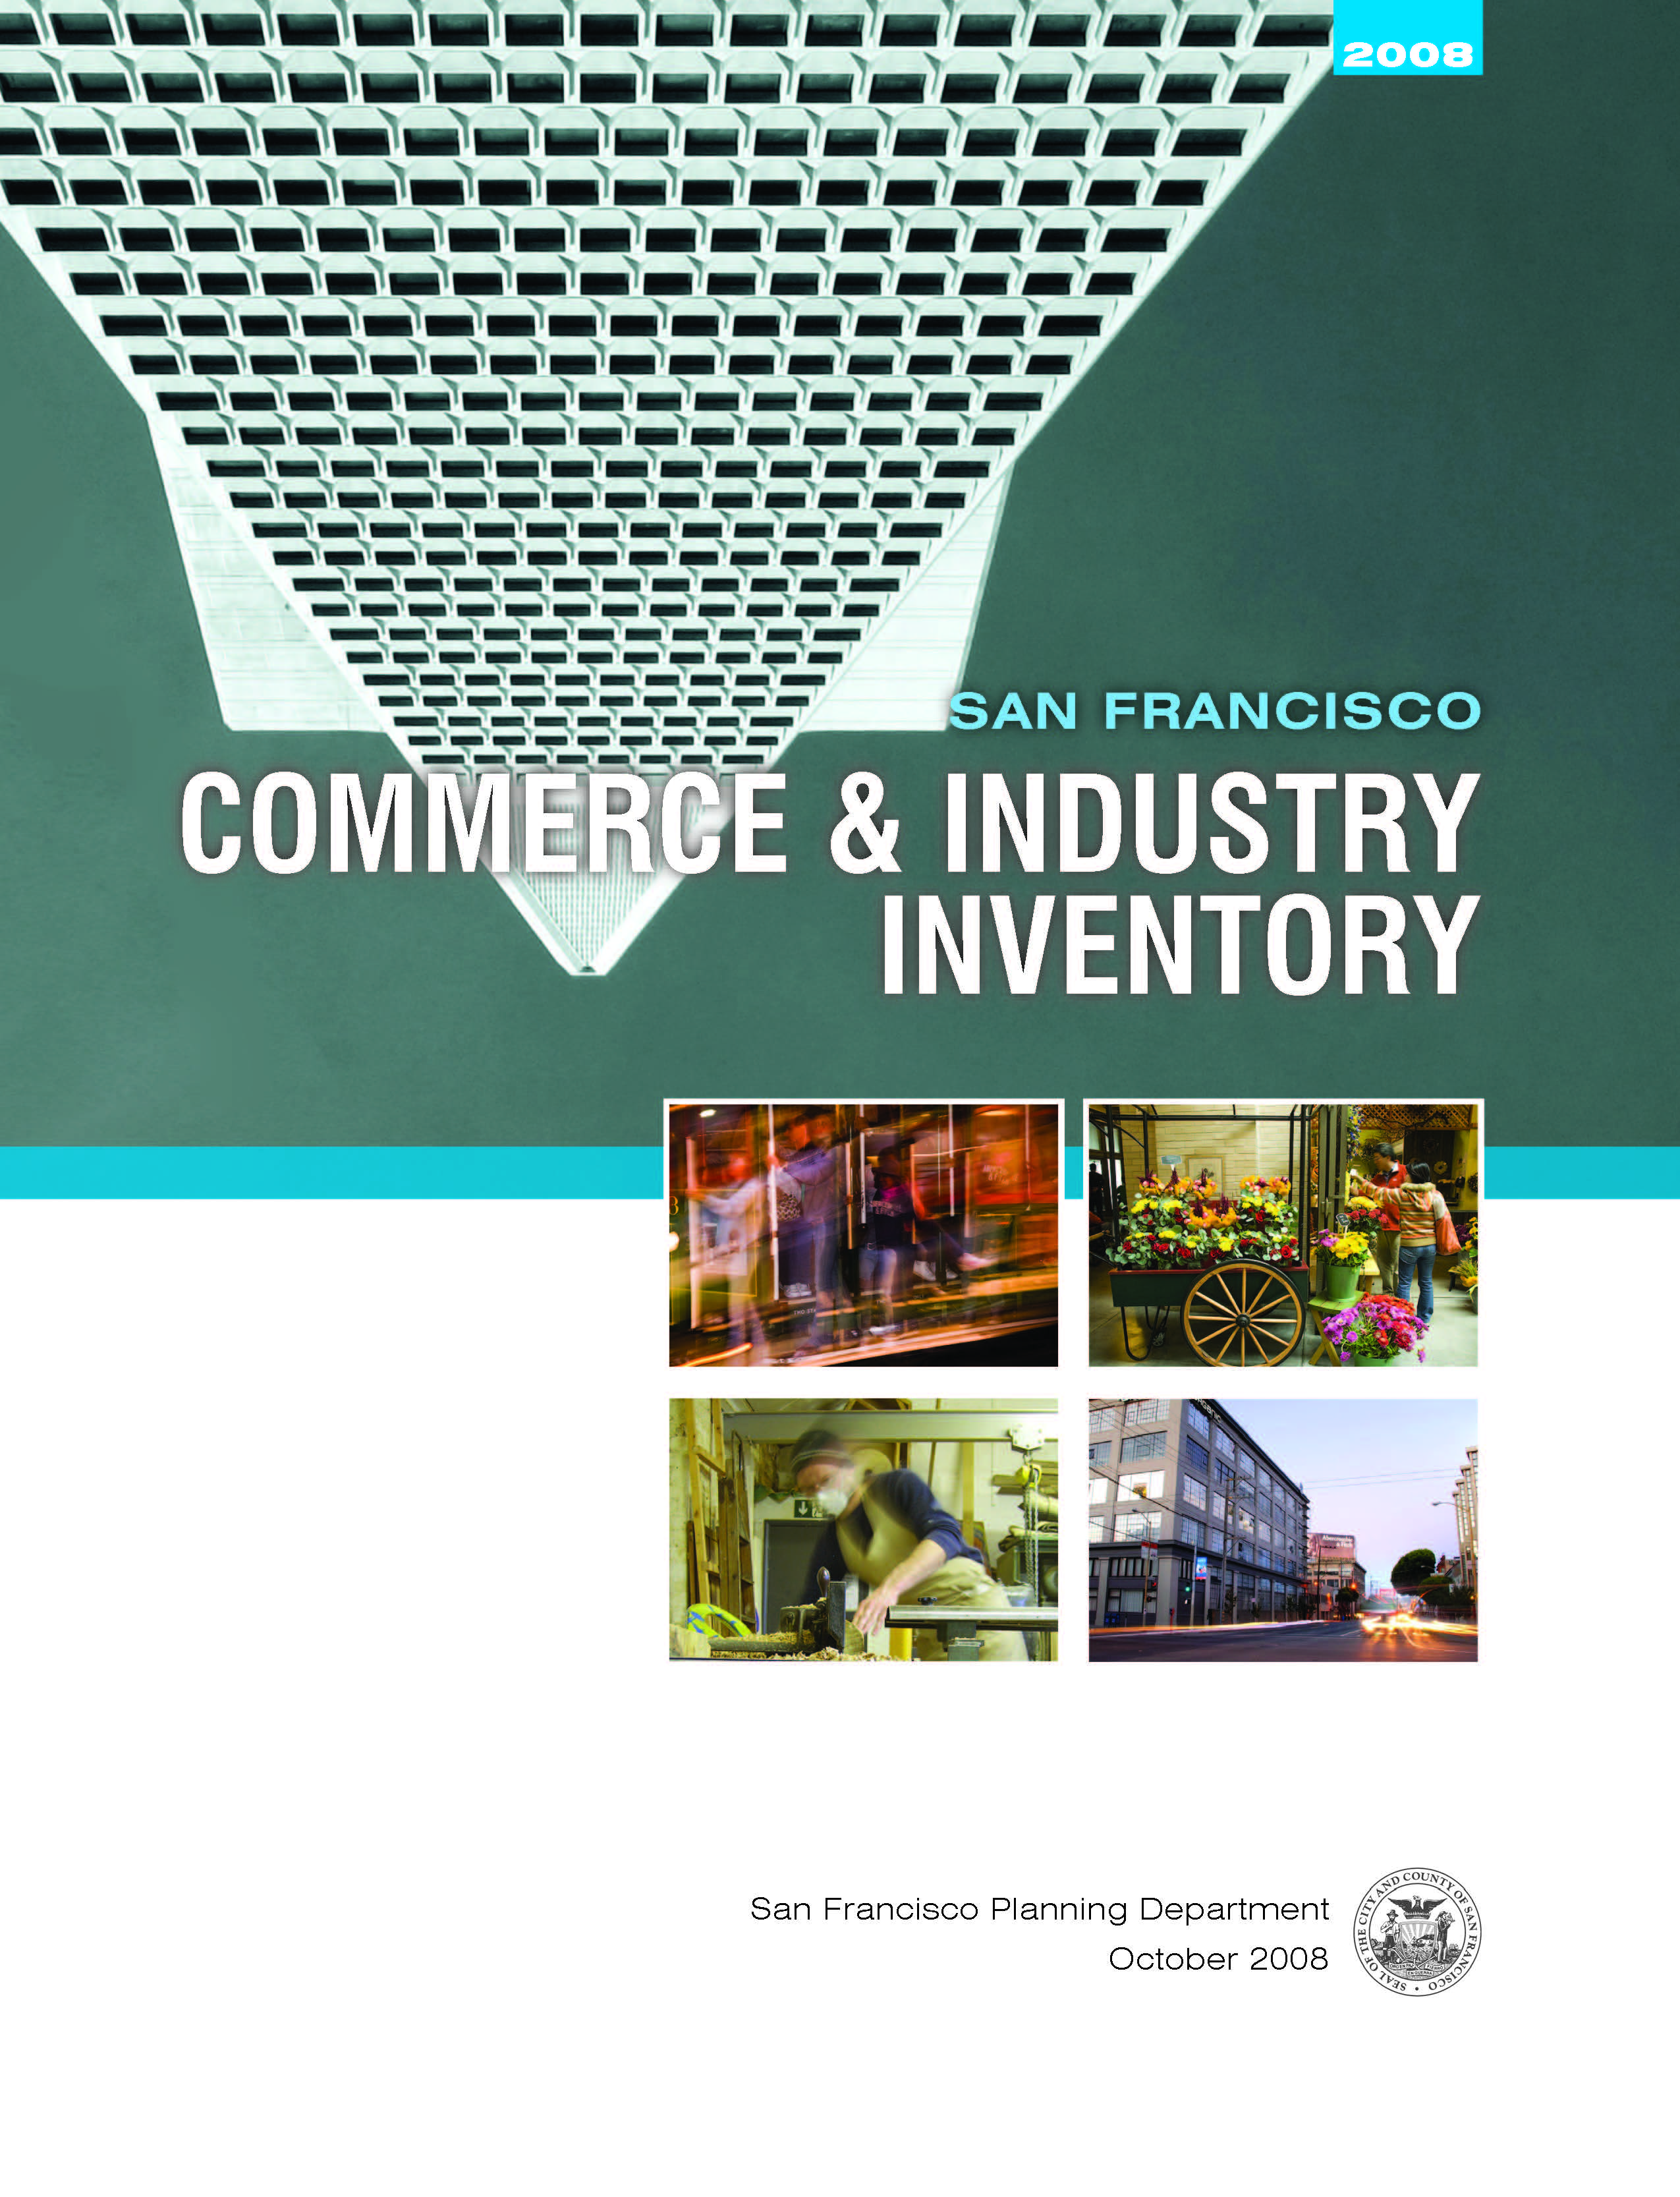 Cover Image for the Commerce & Industry Inventory Report 2008